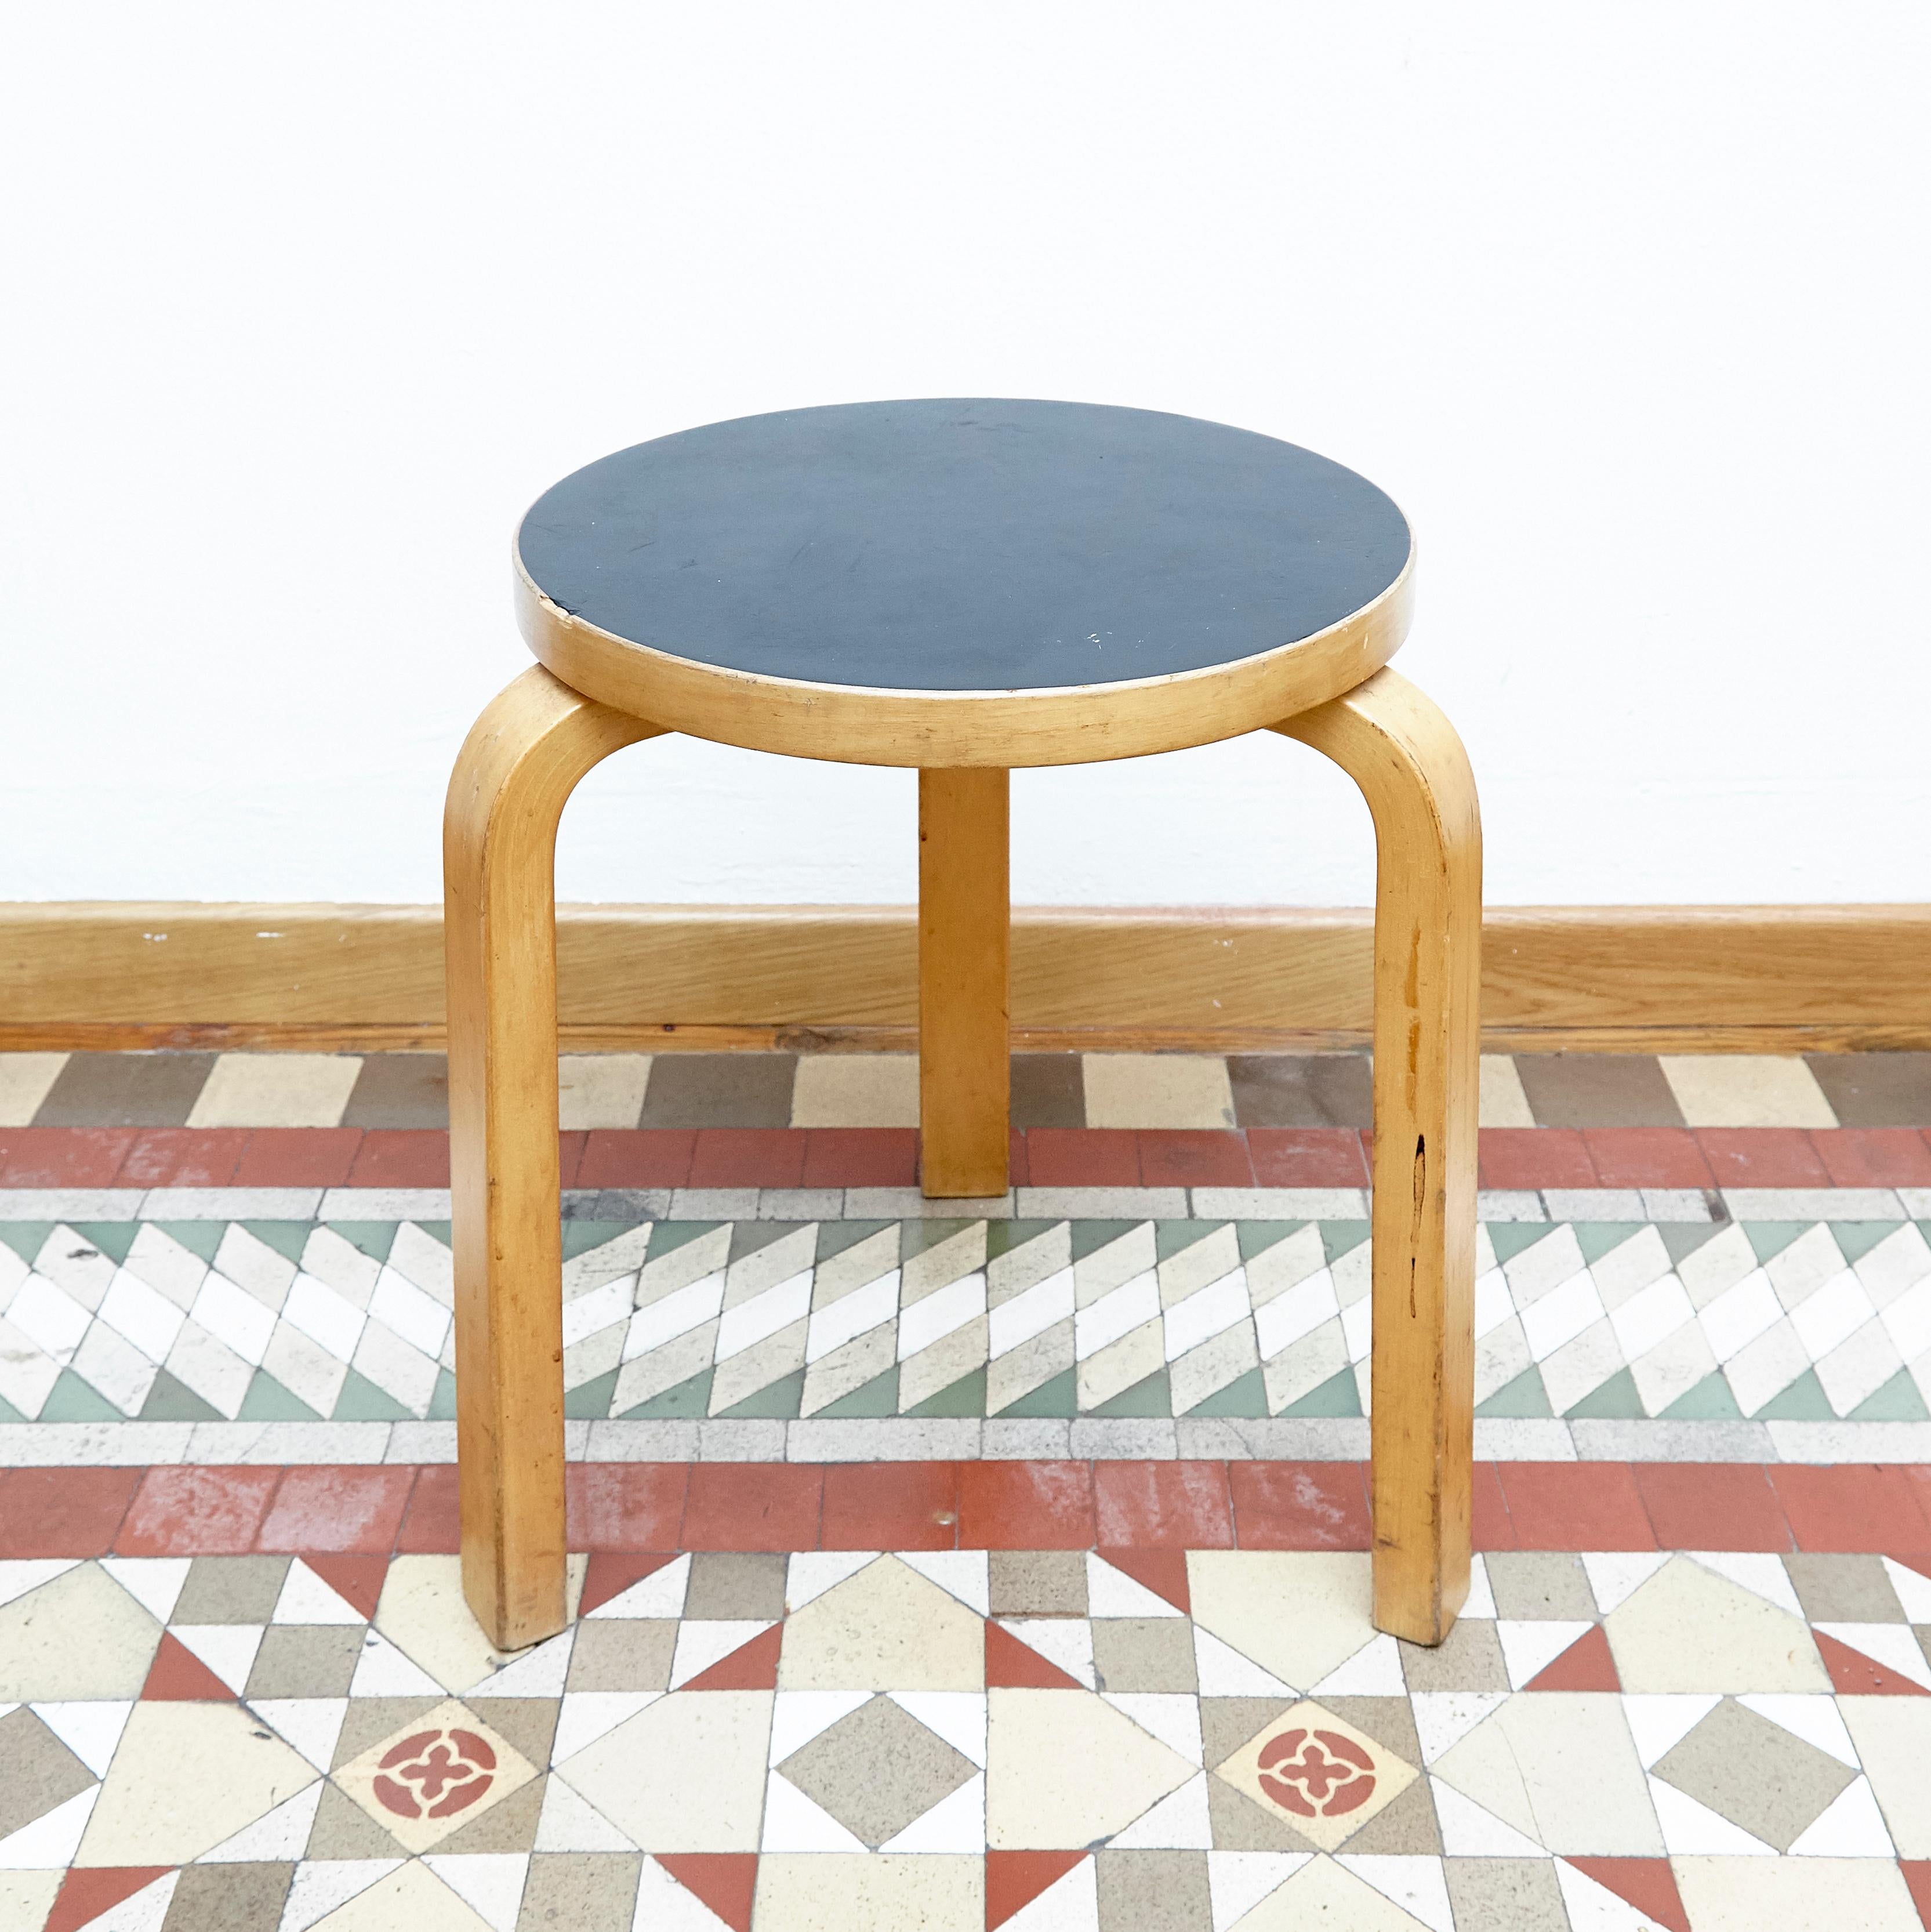 Stool designed by Alvar Aalto, circa 1960.
Manufactured by Artek (Finland).

Wood legs and structure.
Linoleum top.

In great original condition, with minor wear consistent with age and use, preserving a beautiful patina.

Hugo Alvar Henrik